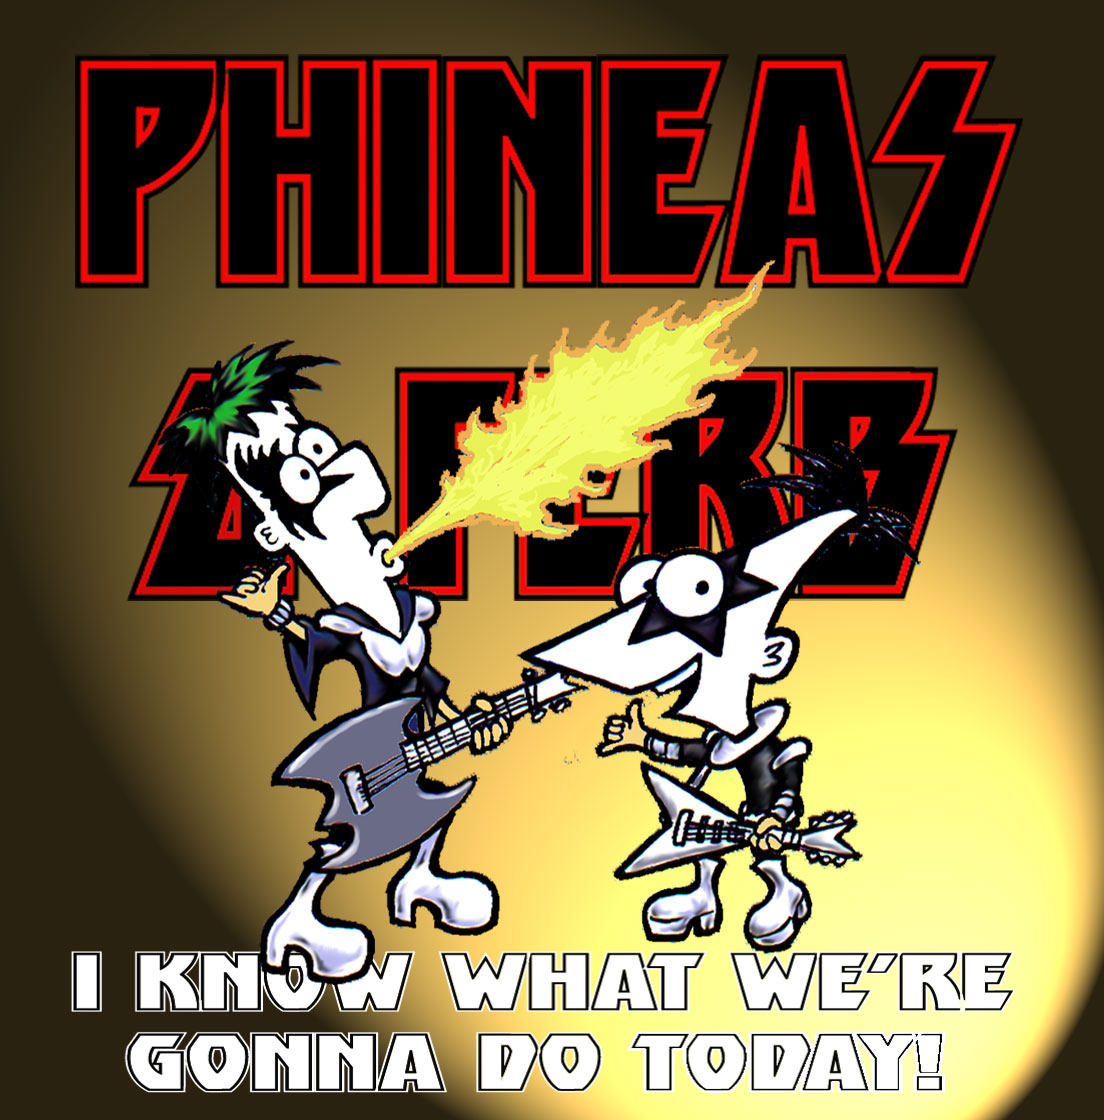 Phineas and Ferb as 